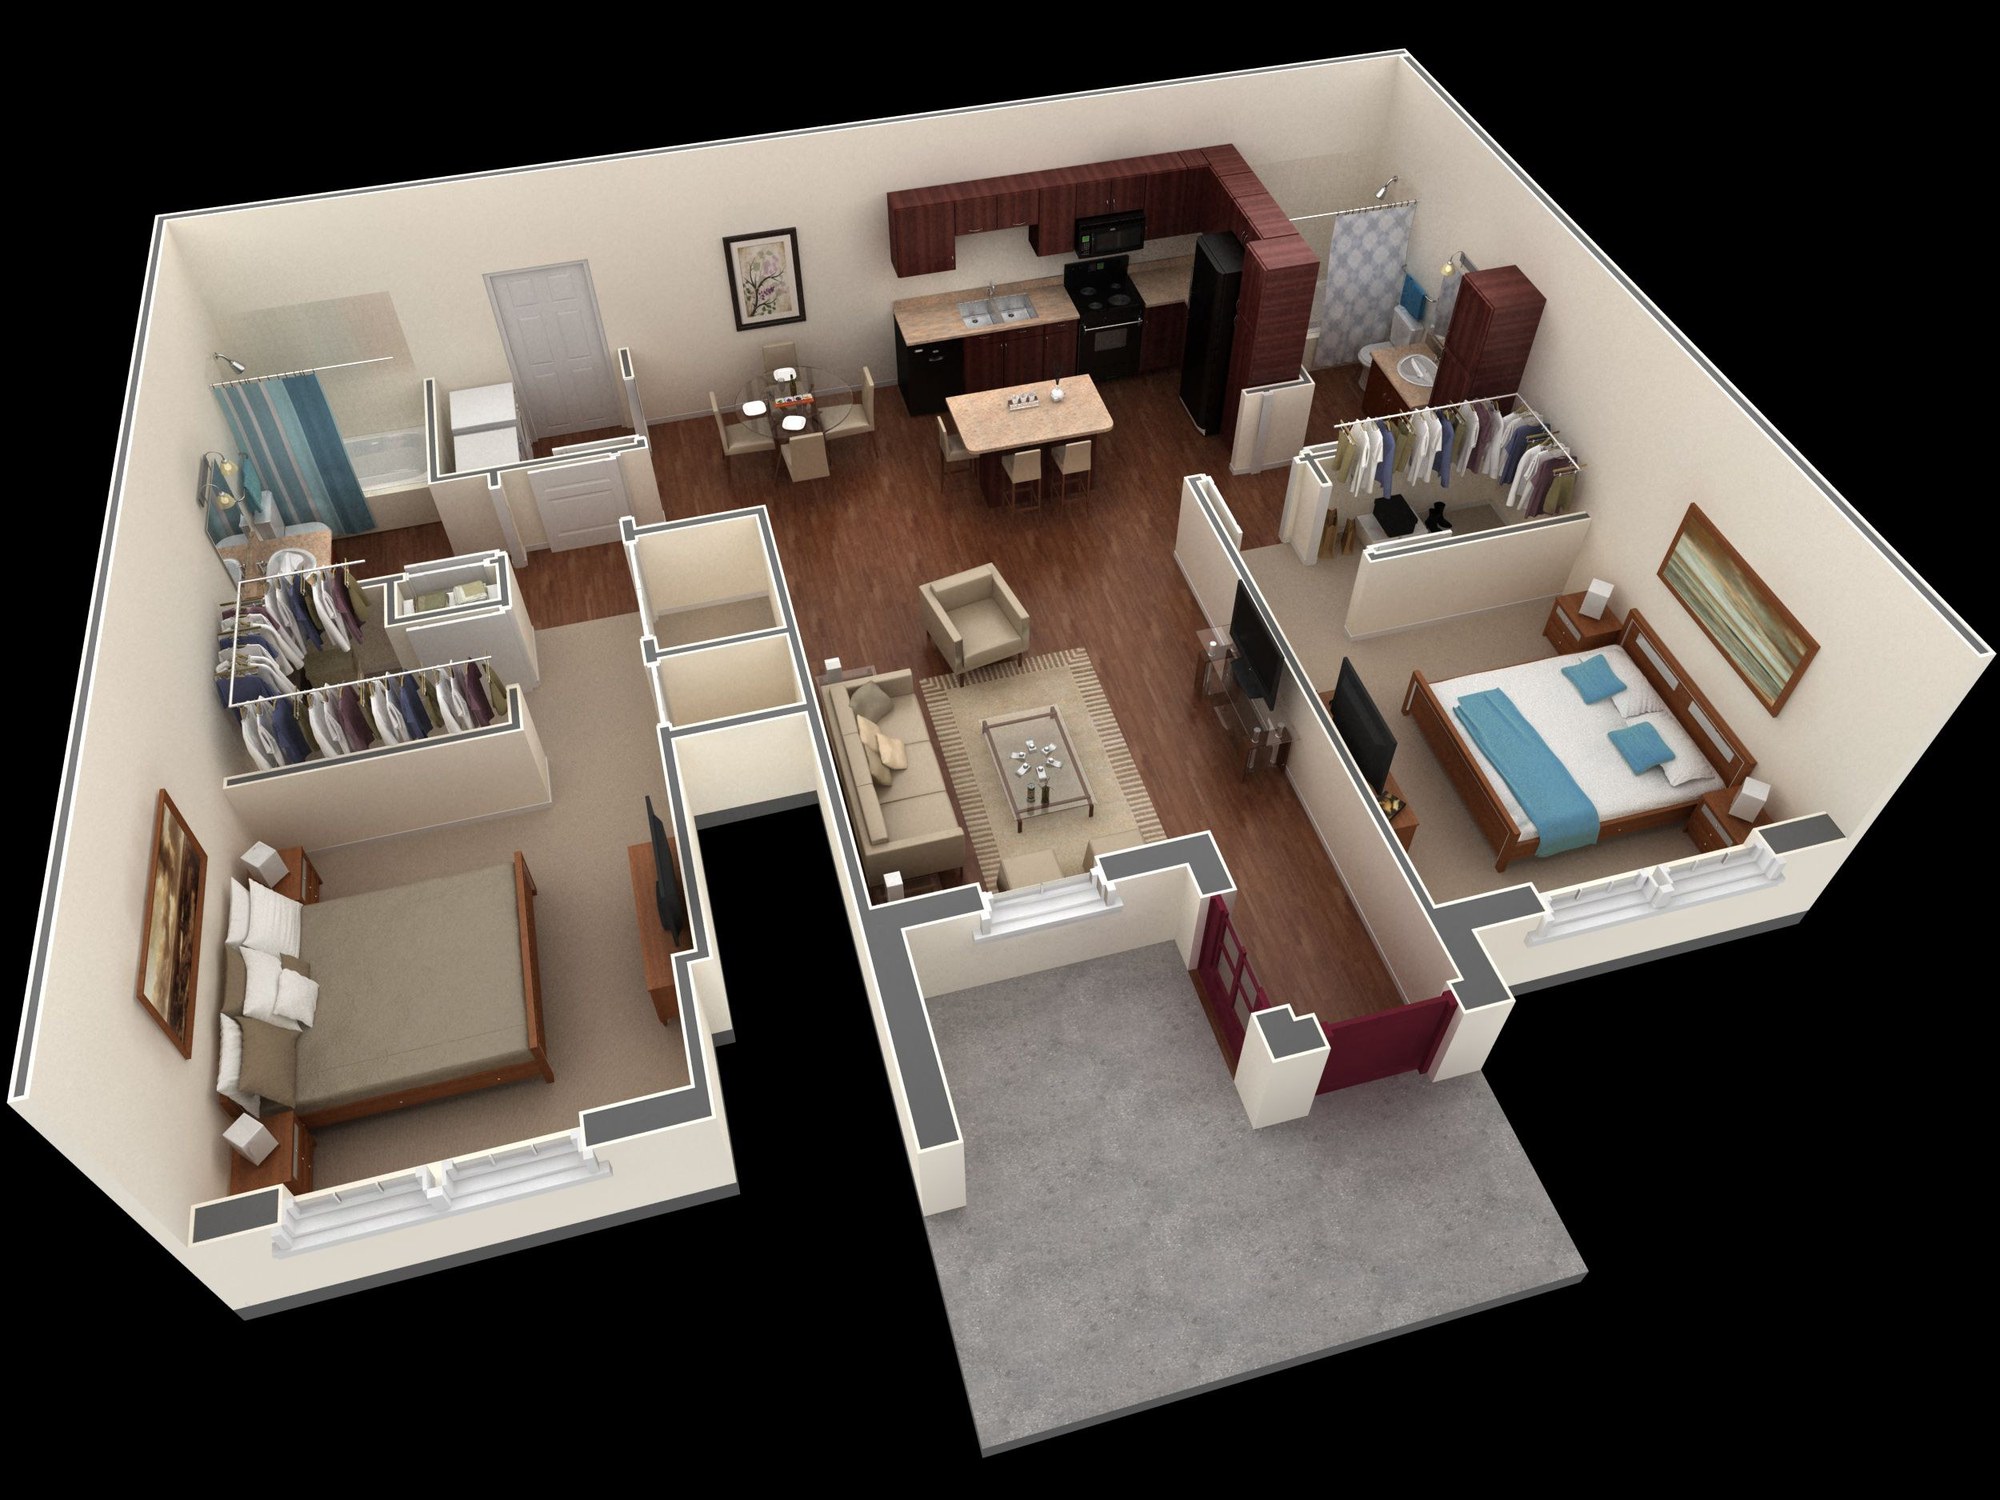 Scientific layout for 4 typical 2-bedroom apartments - Photo 4.